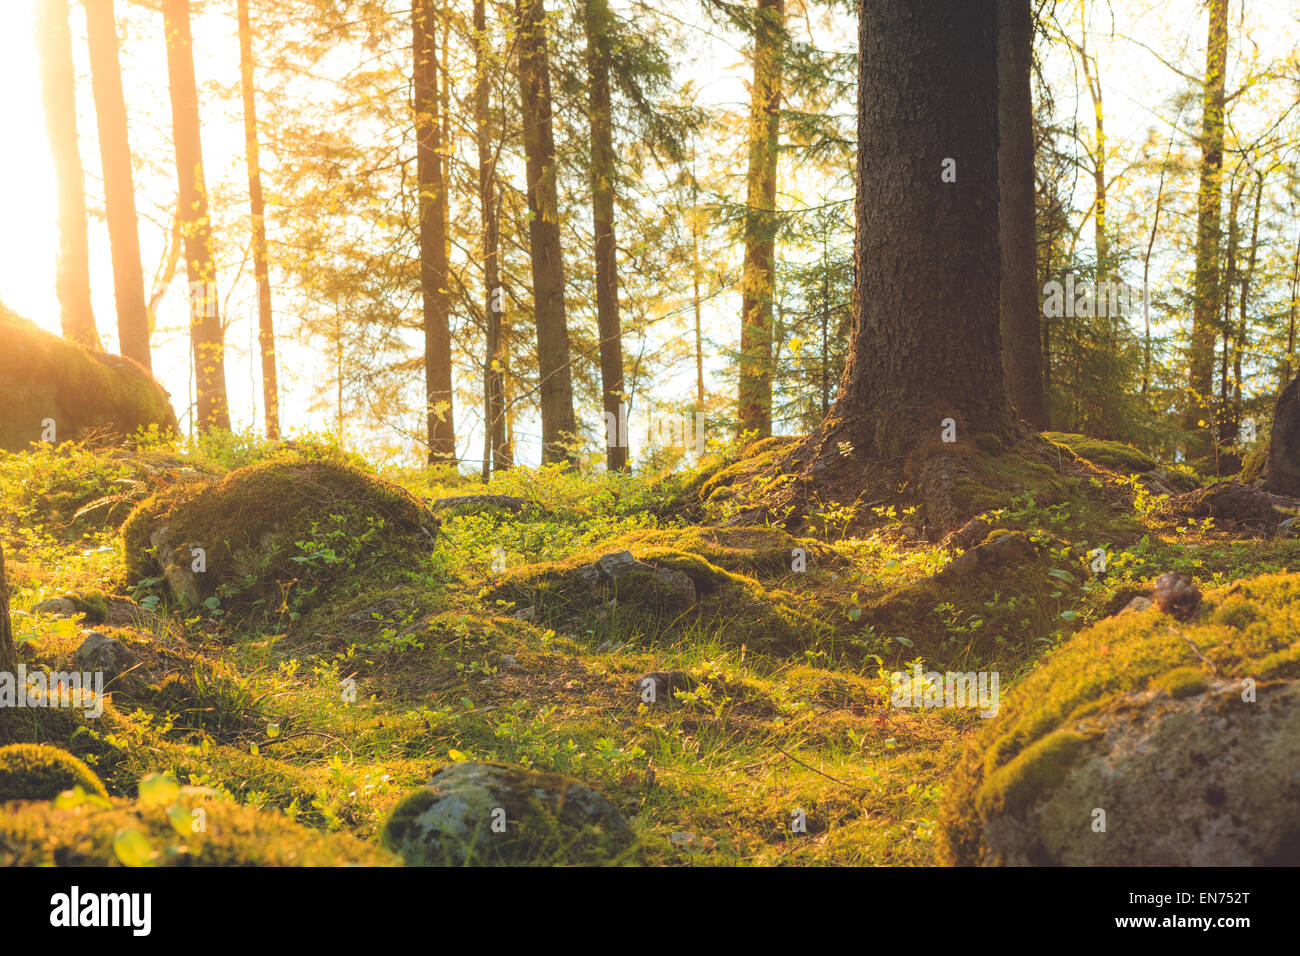 Natural forest at sunset Stock Photo